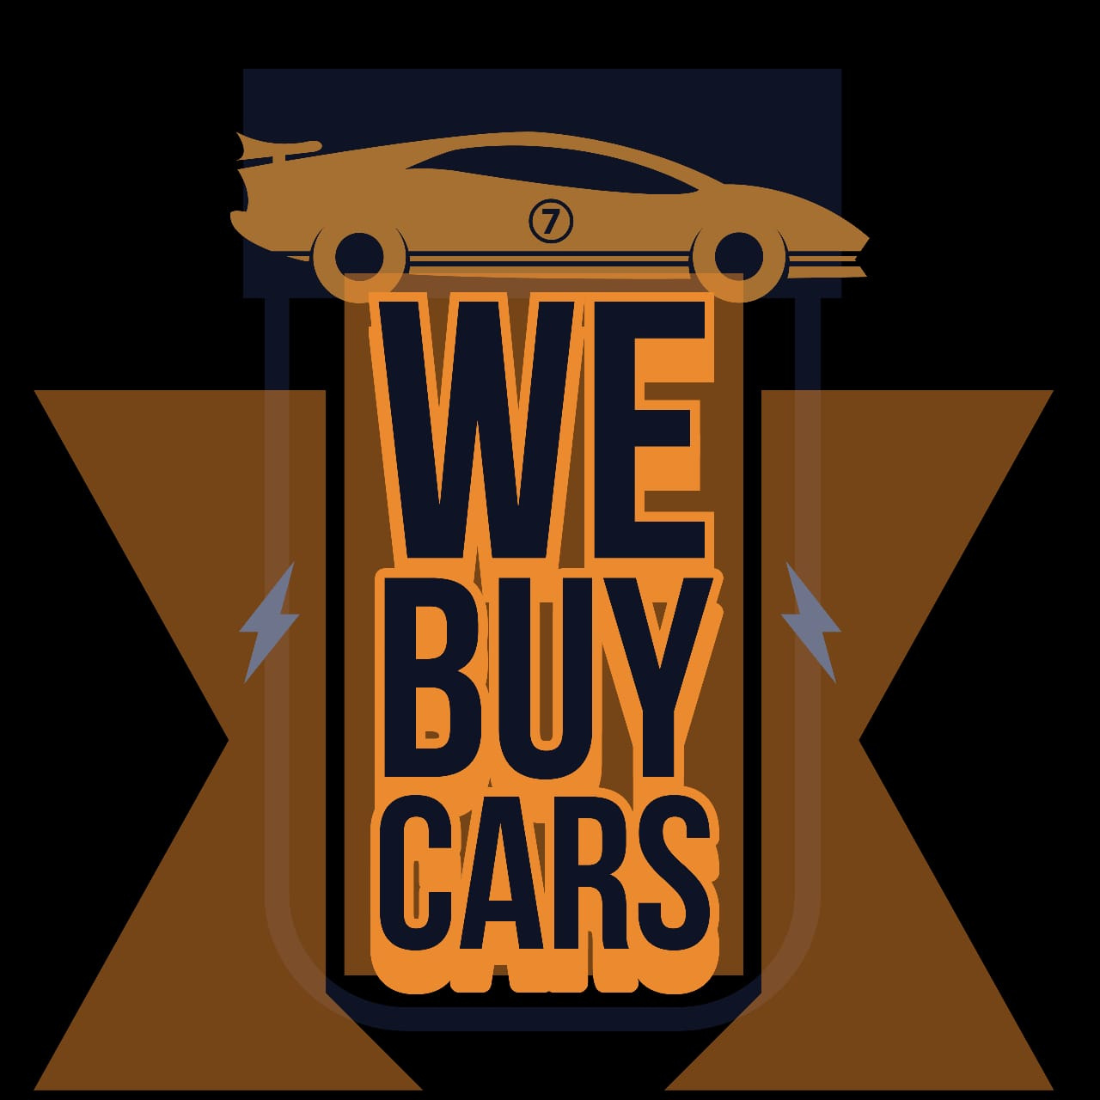 We Buy Cars Business Logos cover image.